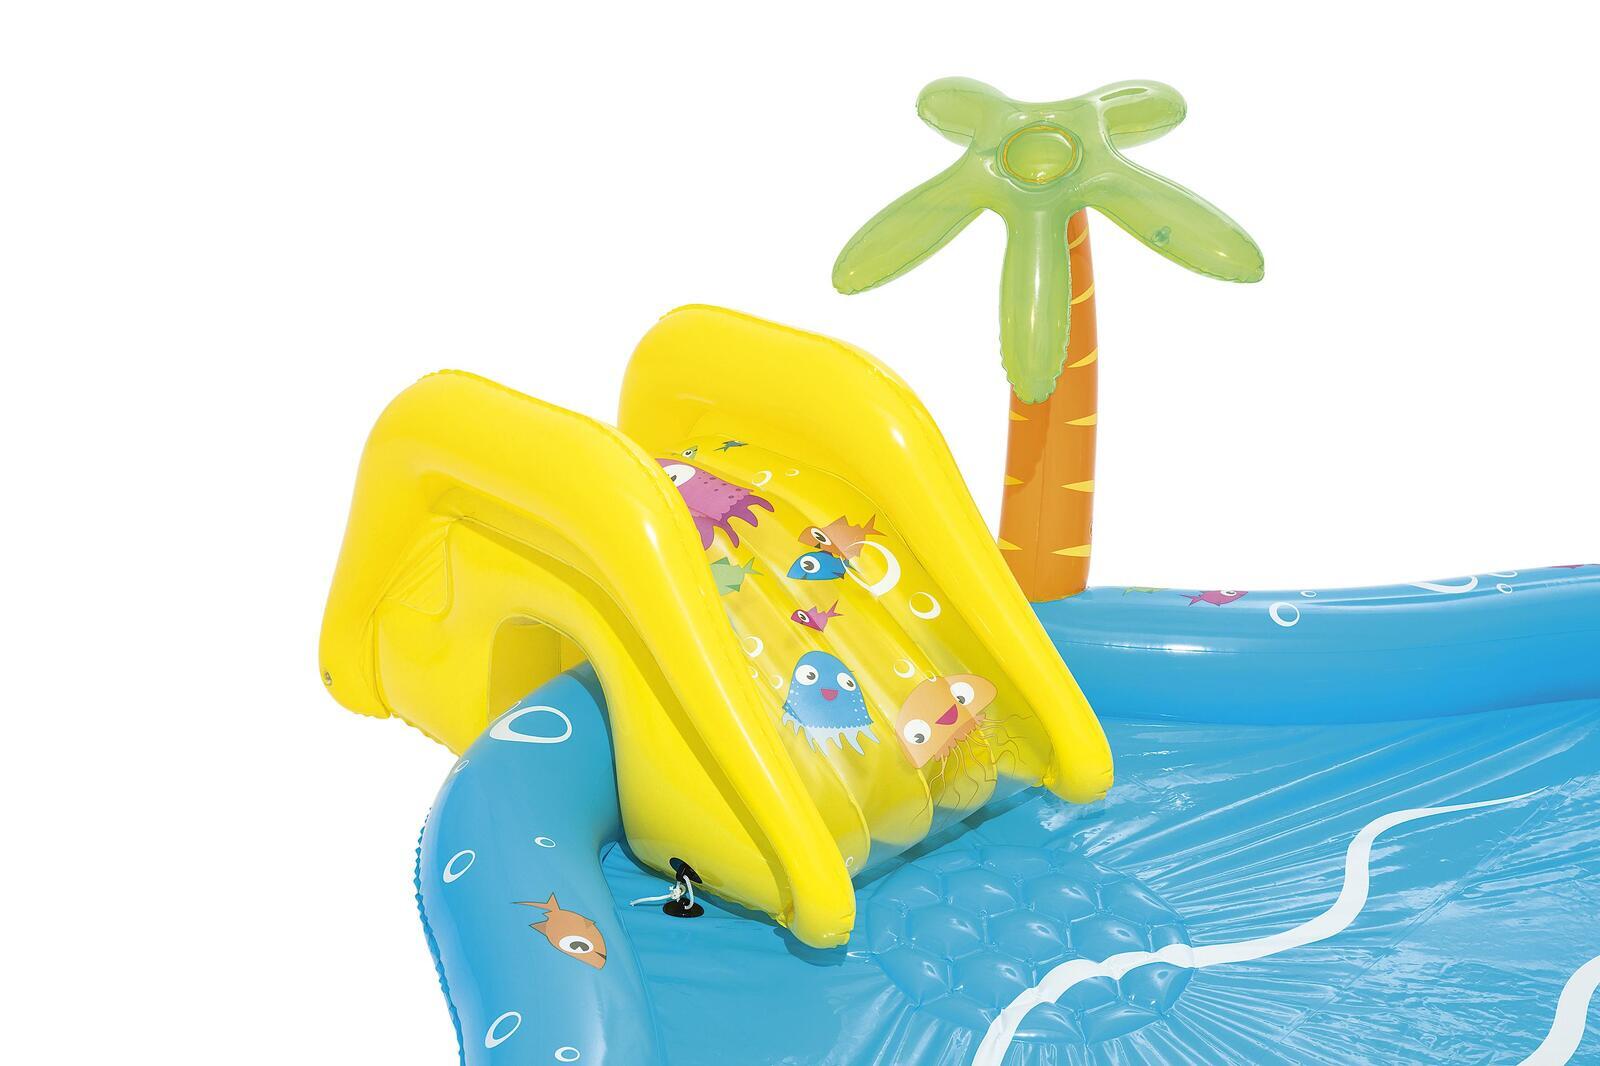 273L Inflatable Sea Life Water Fun Park Pool with Slide - 2.8m x 87cm